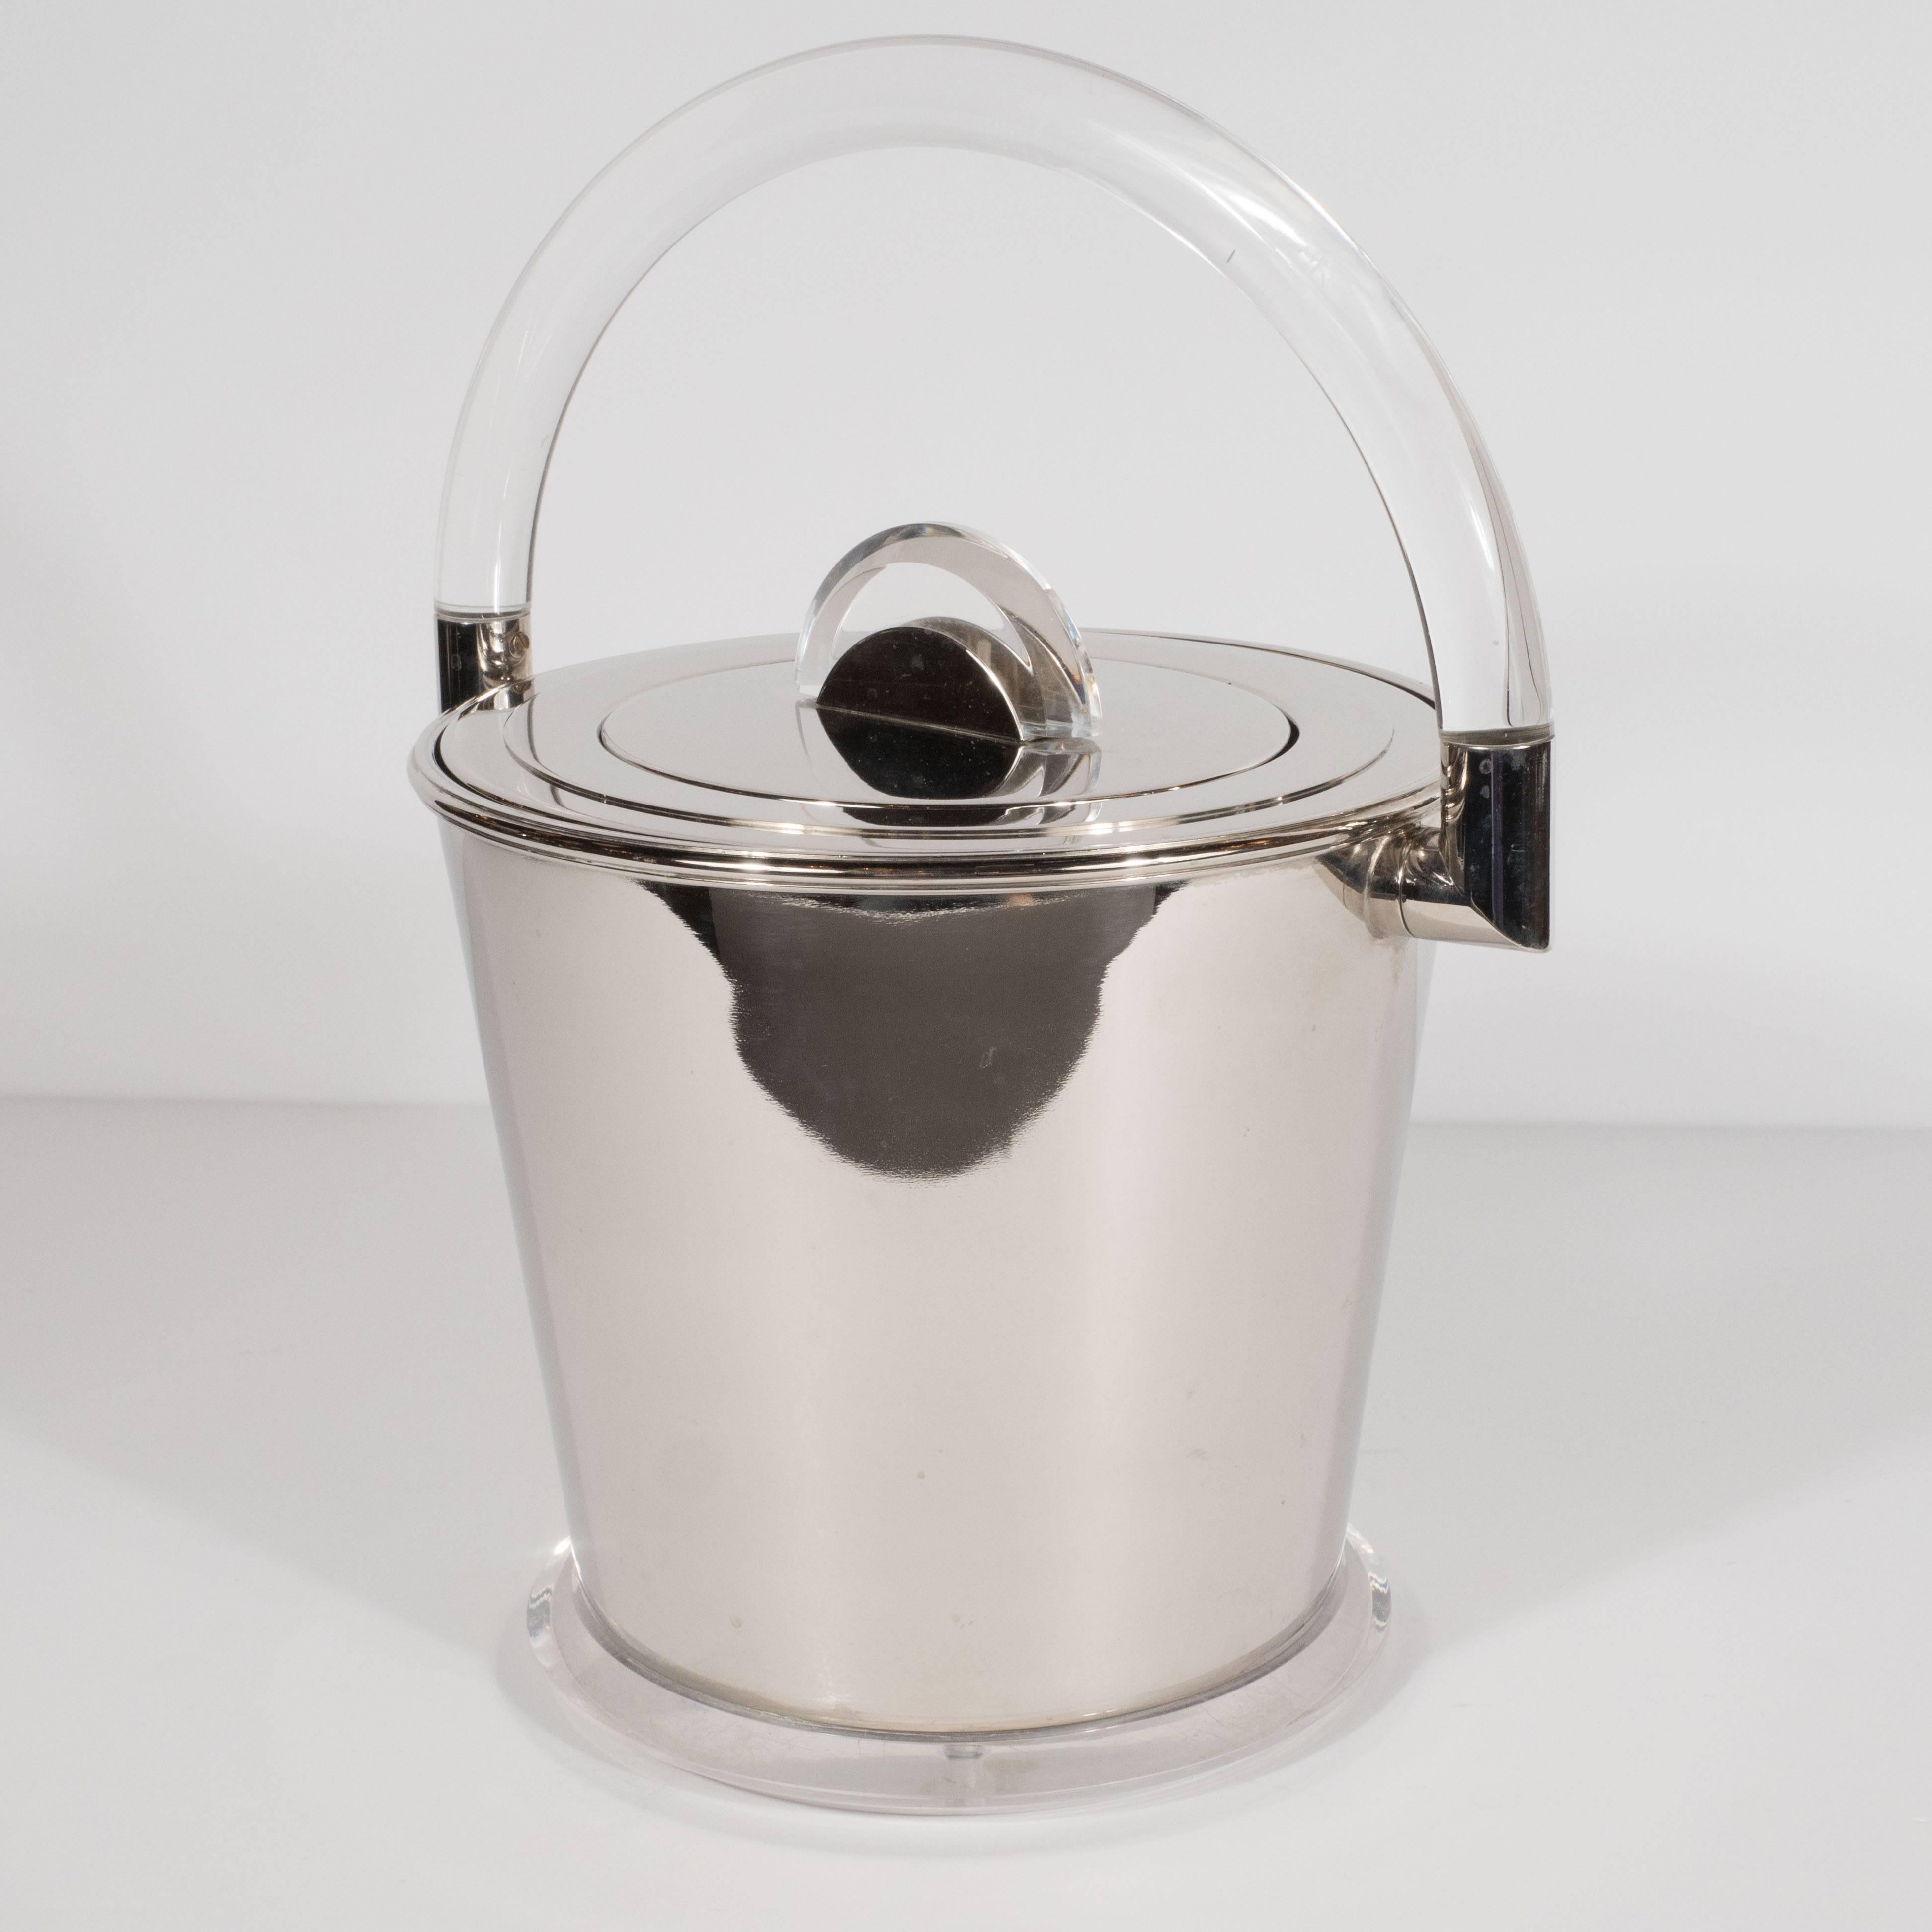 Italian Mid-Century Modern Chrome and Lucite Ice Bucket by Montagnini & Co. 1